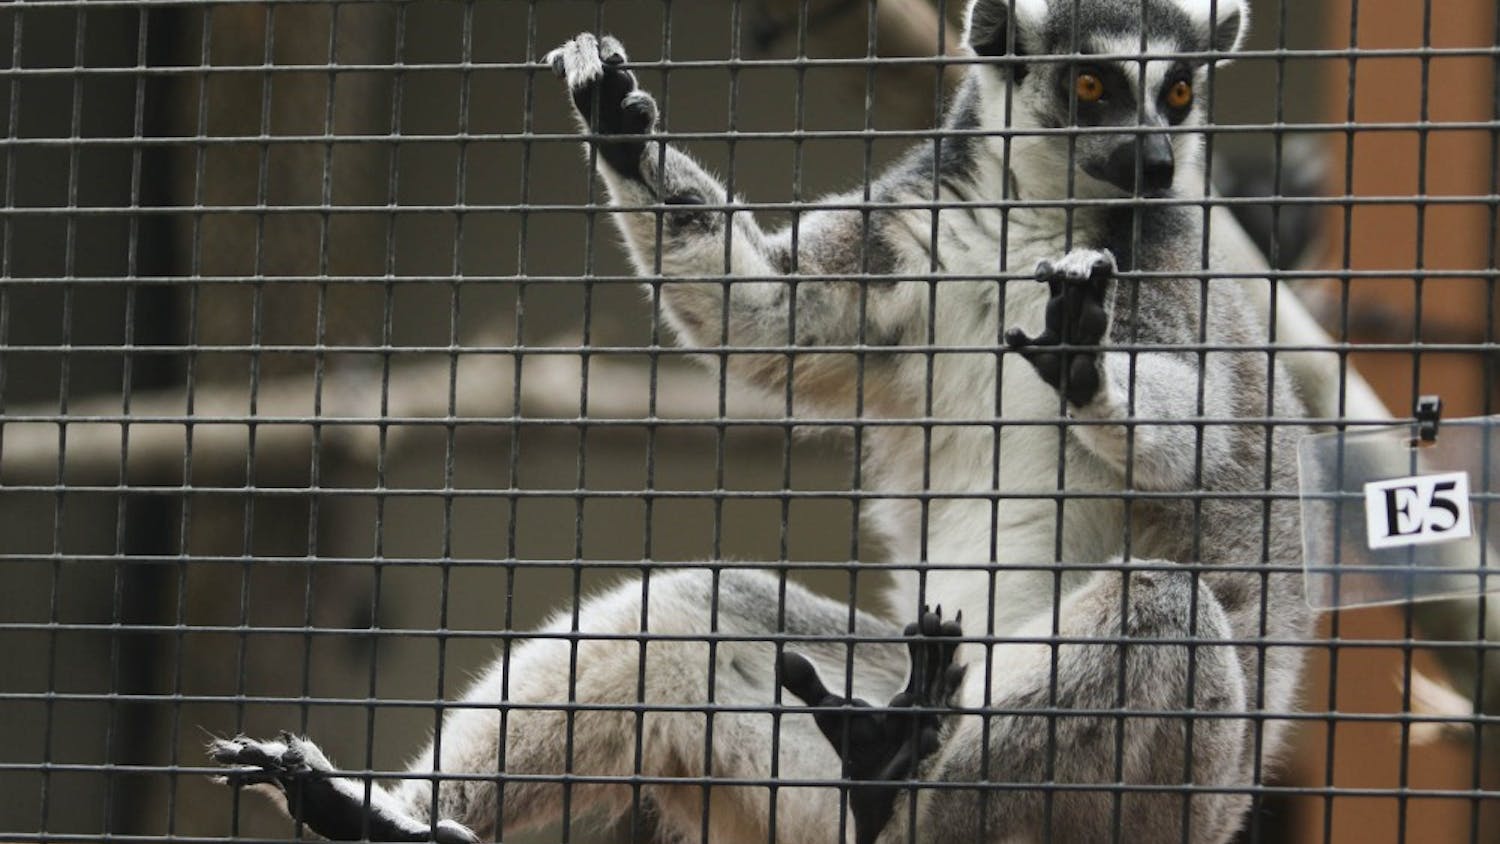 Onyx, a ring-tailed lemur, looks out of his cage during Lemurpalooza at Duke Lemur Center in Durham, NC, on Saturday.